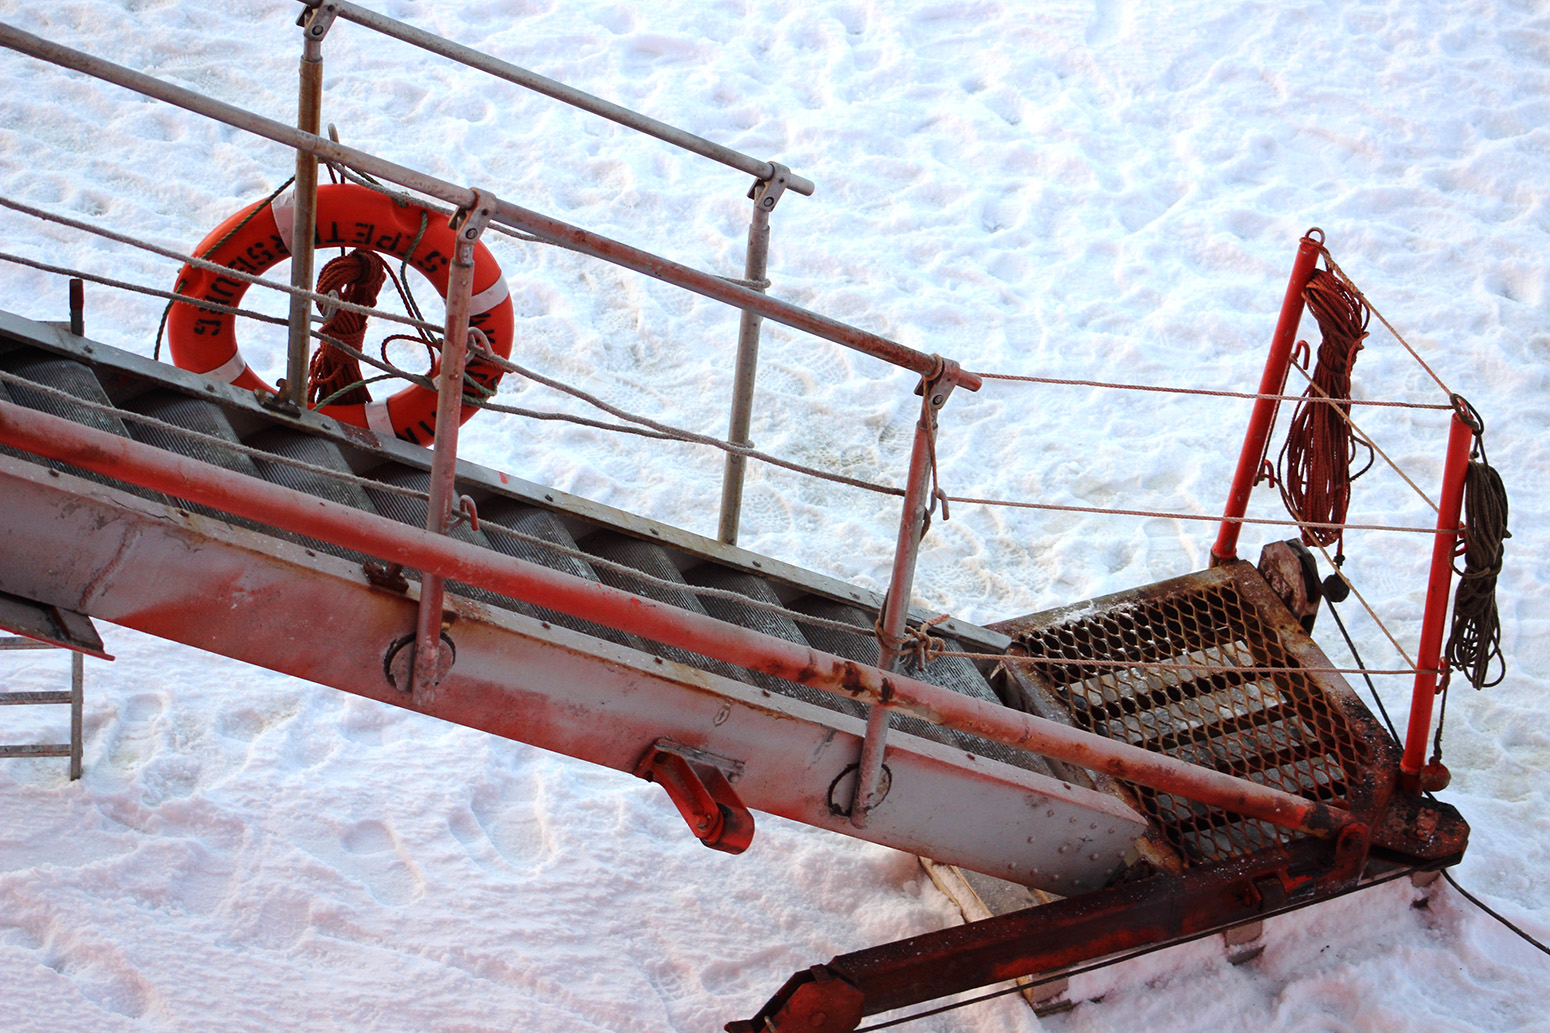 The gangway allowing passage from the Akademik Fedorov to the sea ice above the Central Arctic Ocean.